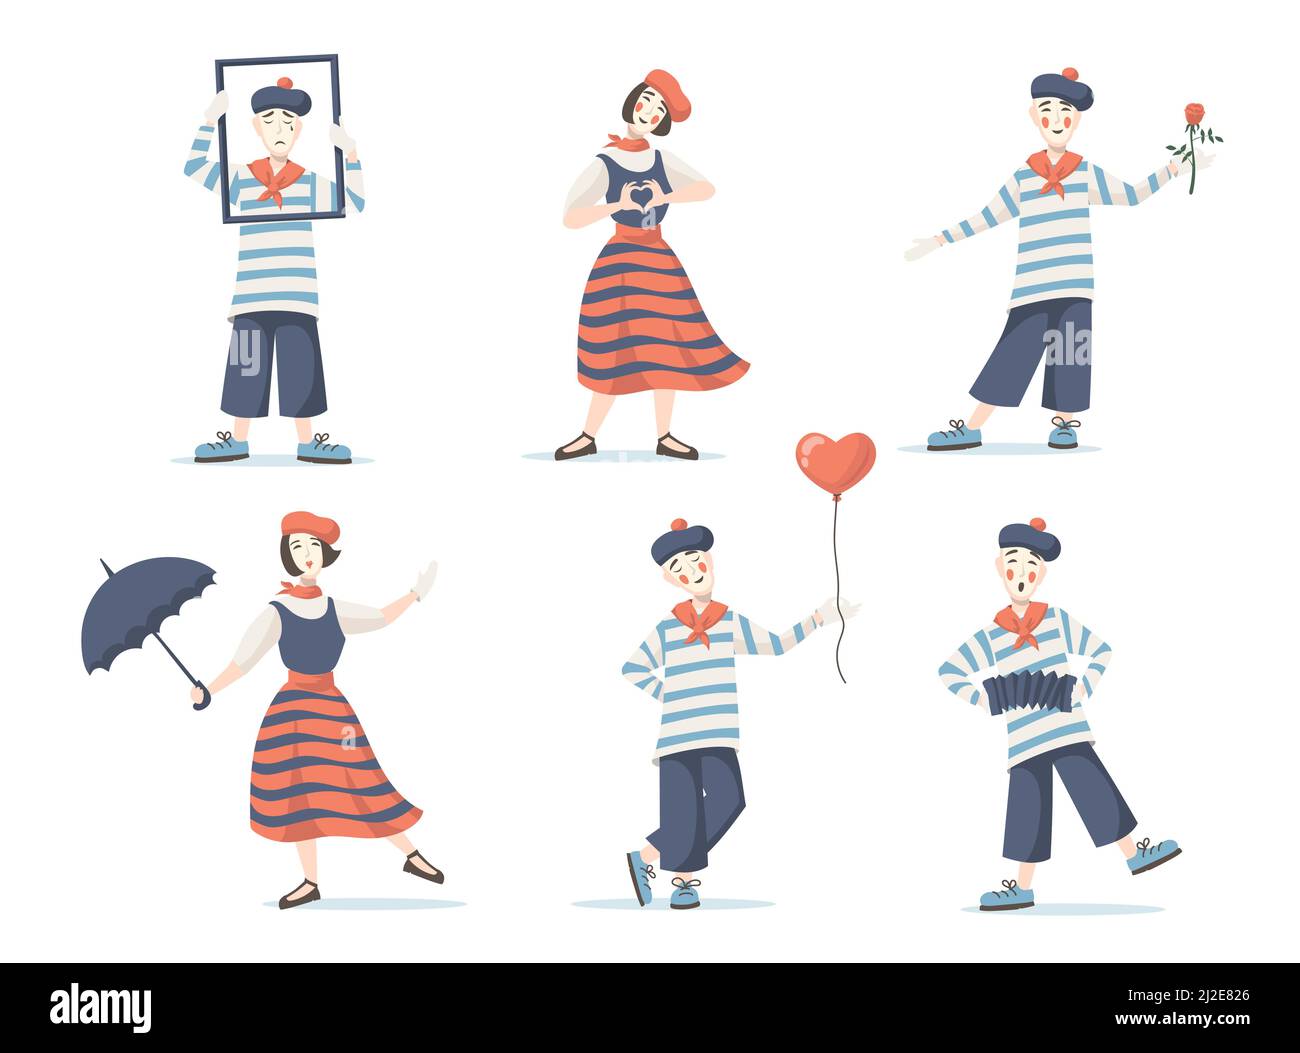 Mimes cartoon characters set. Silent actor and actress performing with frame, umbrella, flower, balloon, male and female circus clowns. Vector illustr Stock Vector